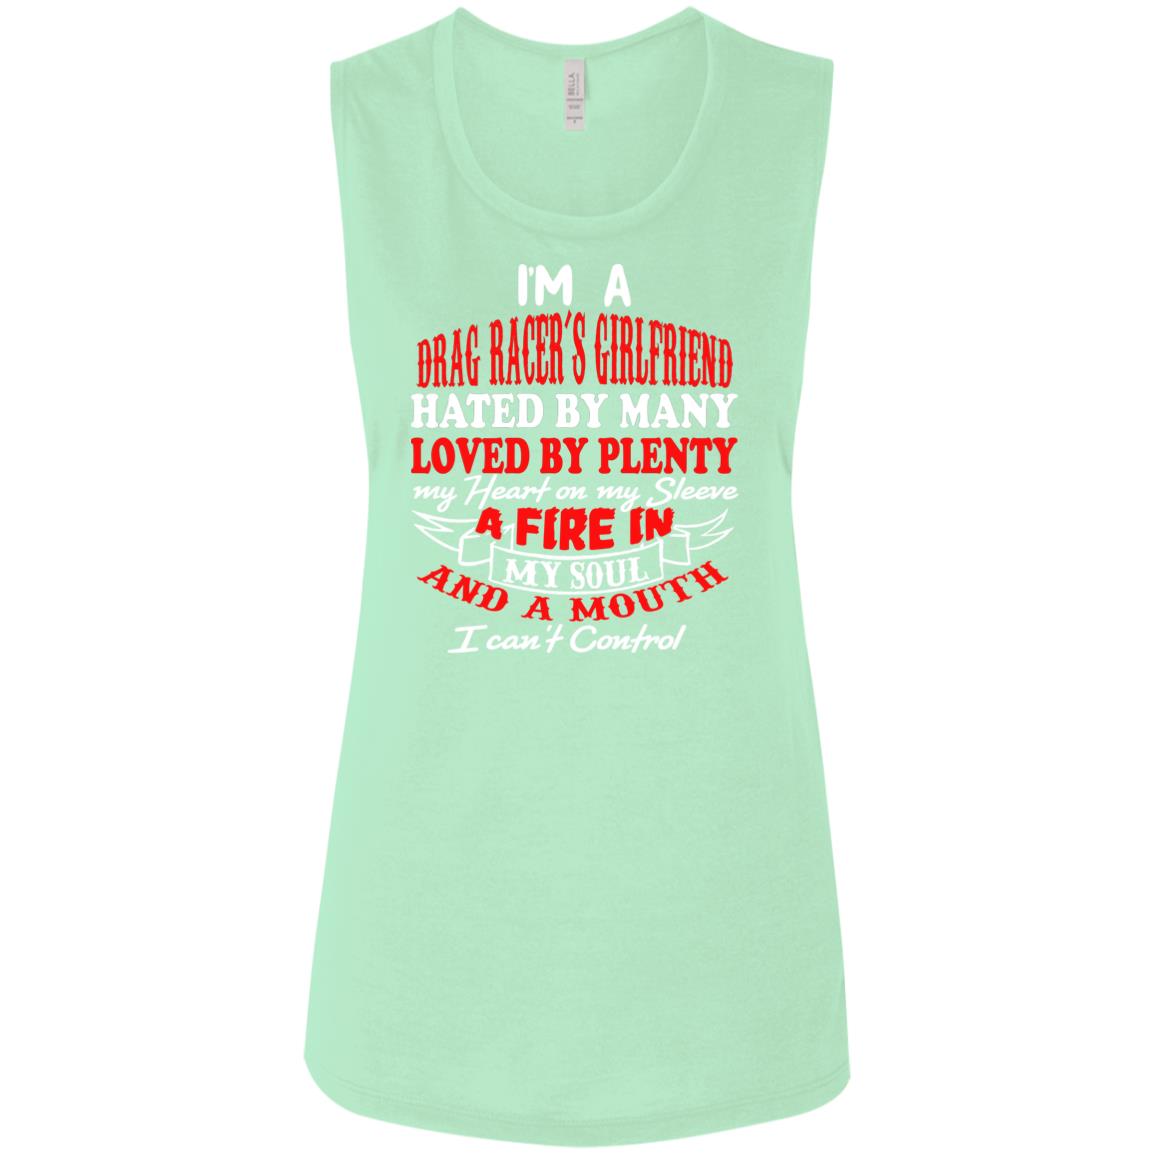 I'm A Drag Racer's Girlfriend Hated By Many Loved By Plenty Ladies' Flowy Muscle Tank